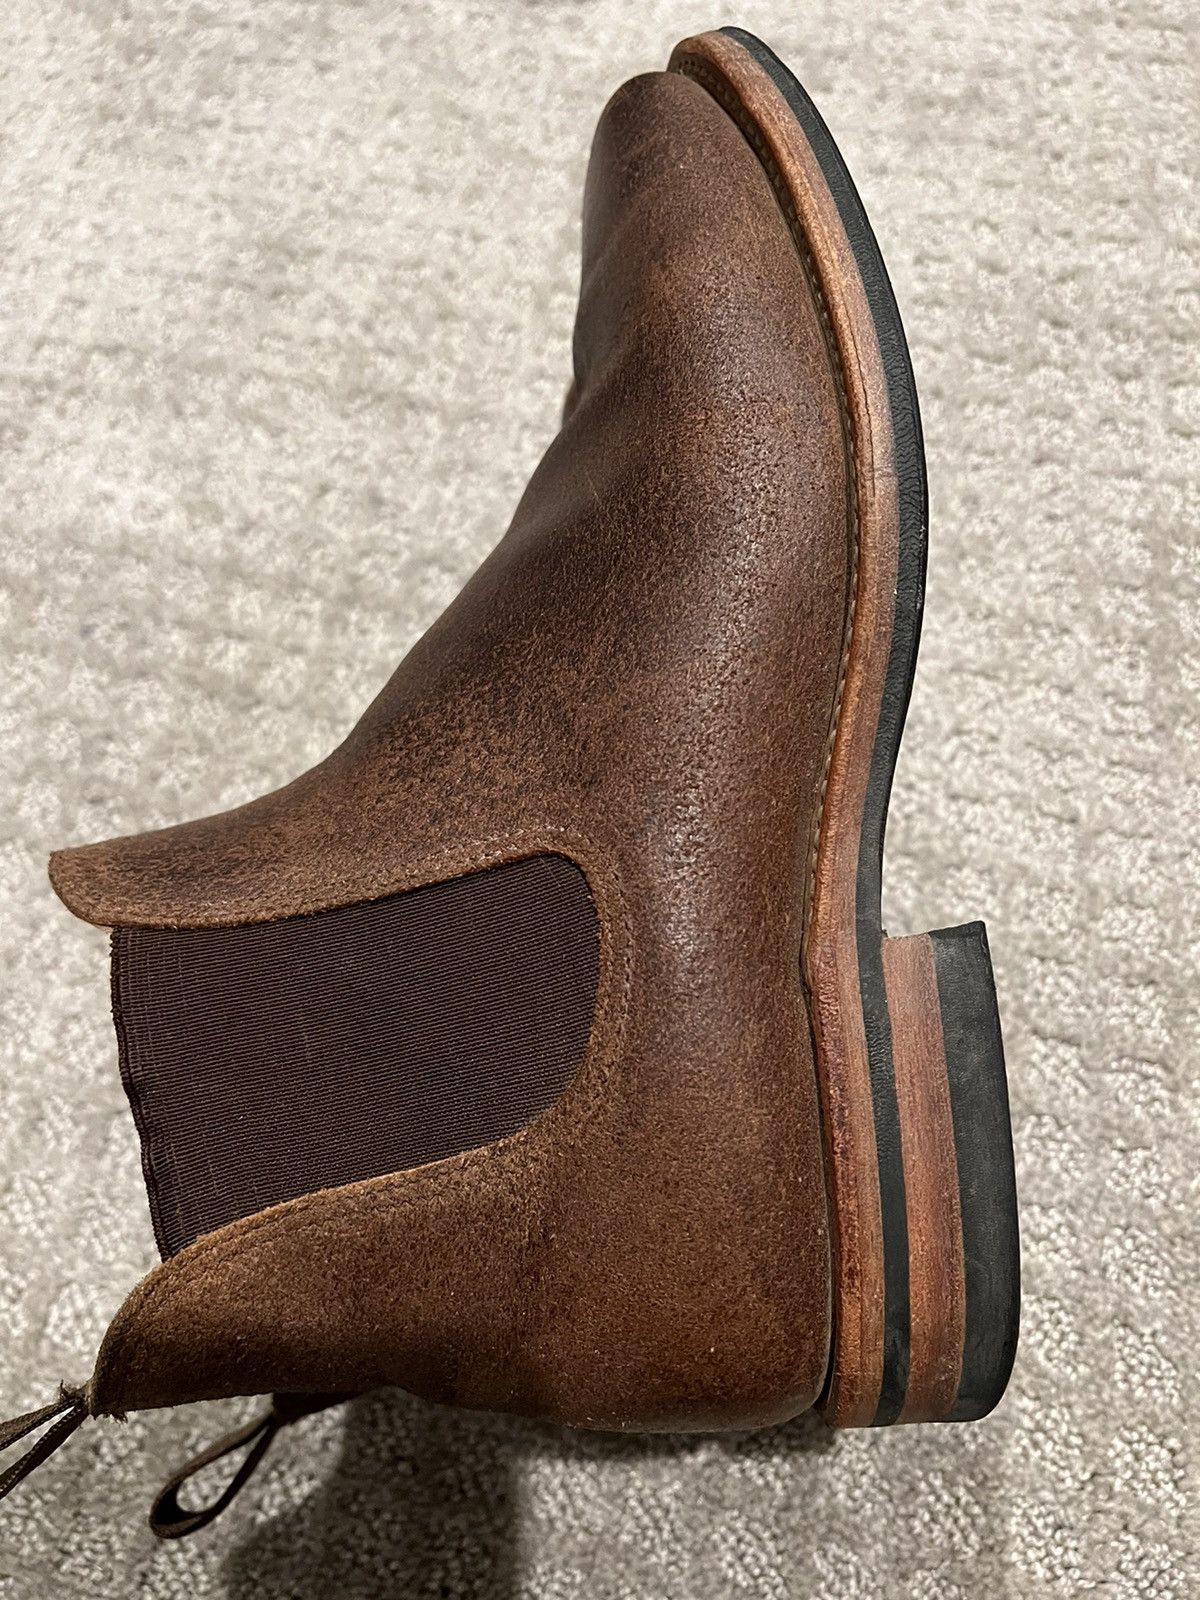 Viberg Viberg 8.5 9.5US Natural waxed flesh roughout Chelsea boots Size US 8.5 / EU 41-42 - 10 Preview